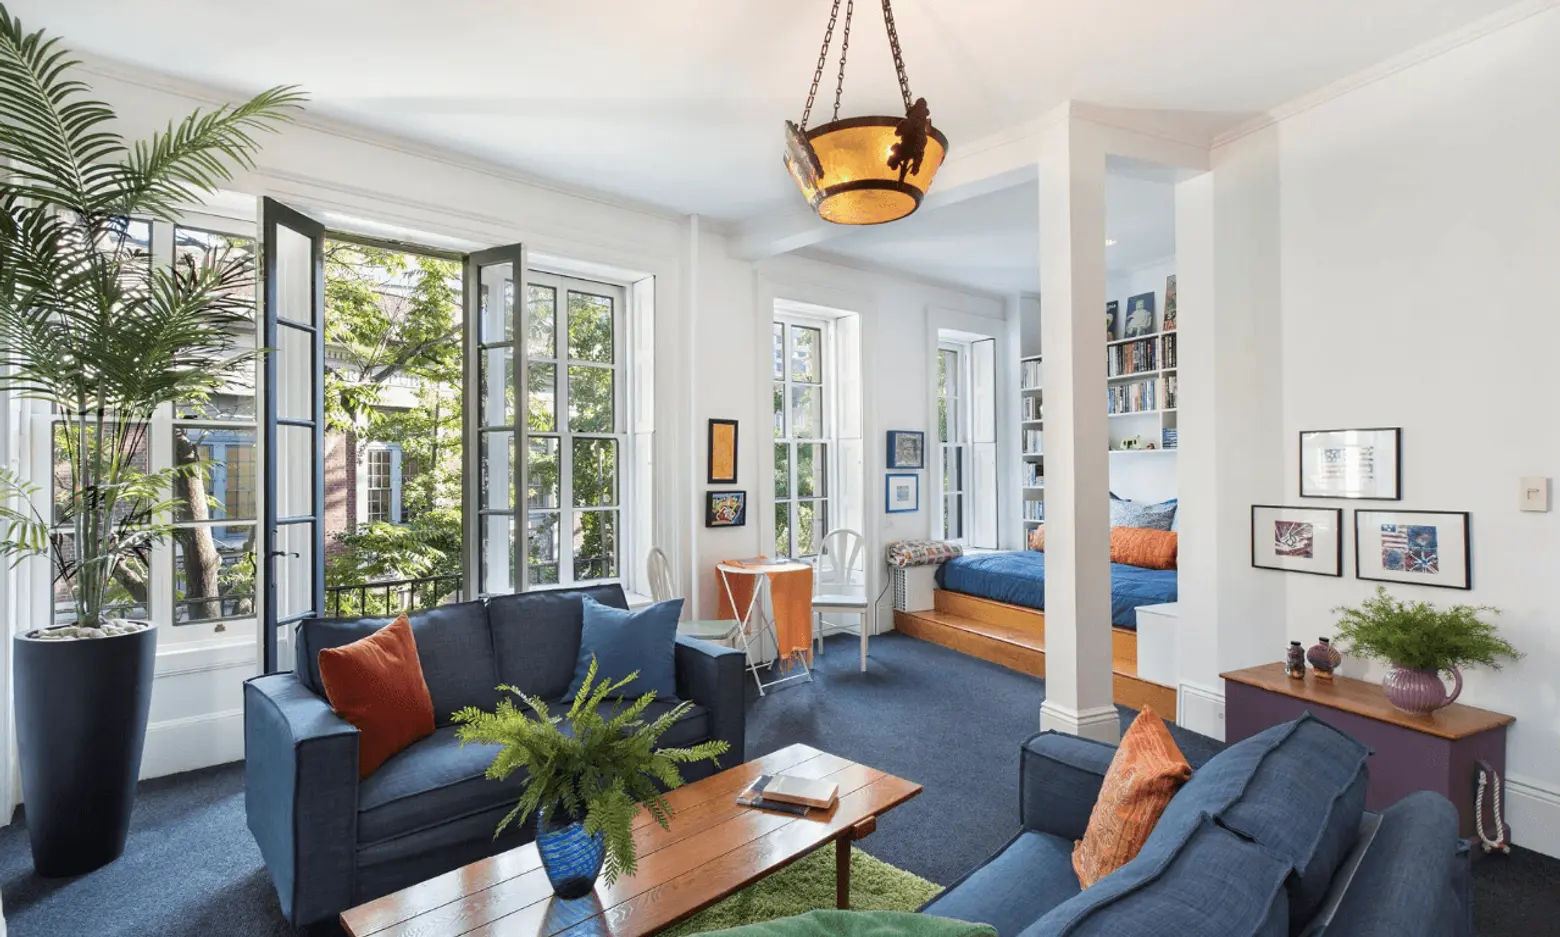 17 st luke's place, cool listings, west village, townhouses, historic homes, interiors